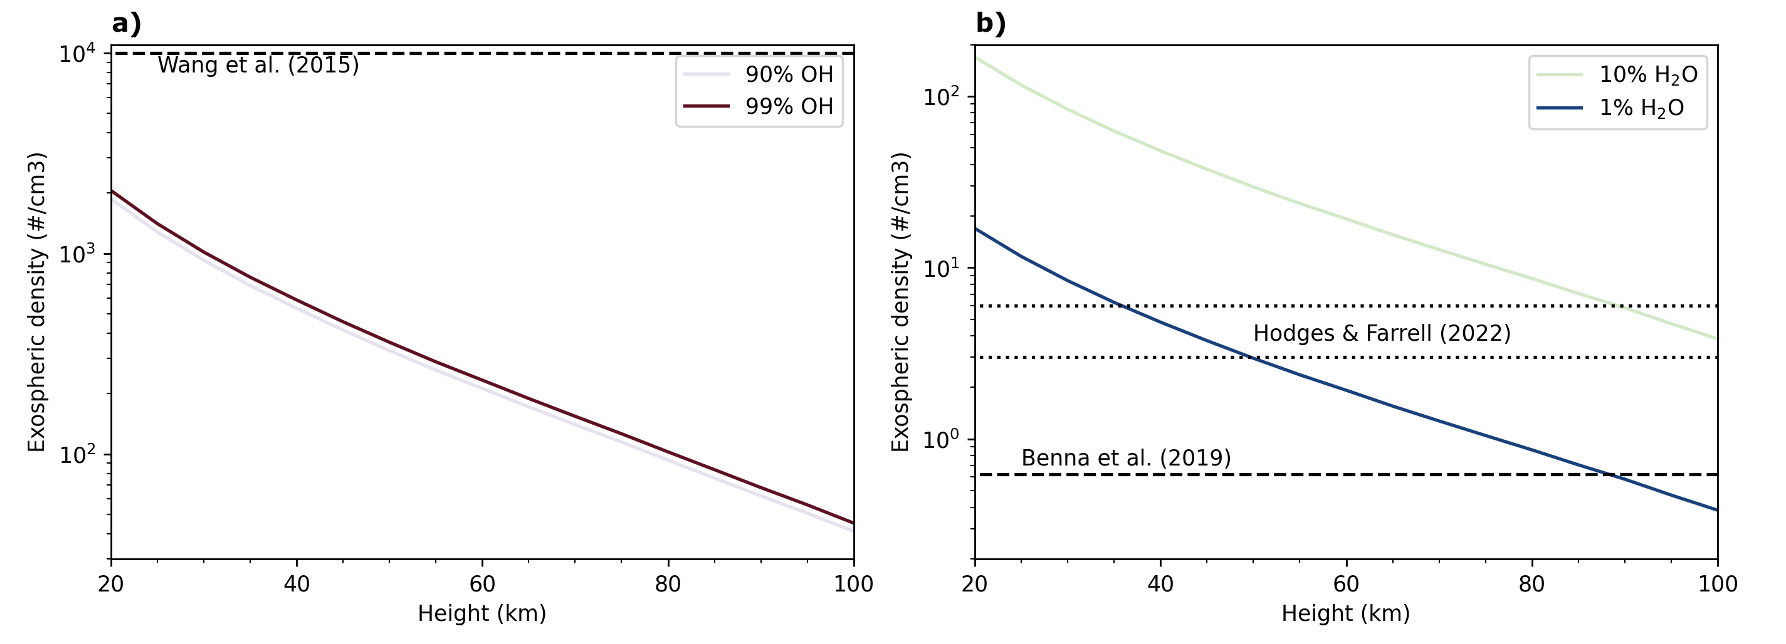 Two panels, left is OH exospheric density versus altitude above the surface, compared to Wang et al. (2015) measured density. This plot shows that the OH exospheric density proposed here is lower than observations. Right is the H2O exospheric density versus altitude above the surface, compared to two different interpretations of the LADEE observations.